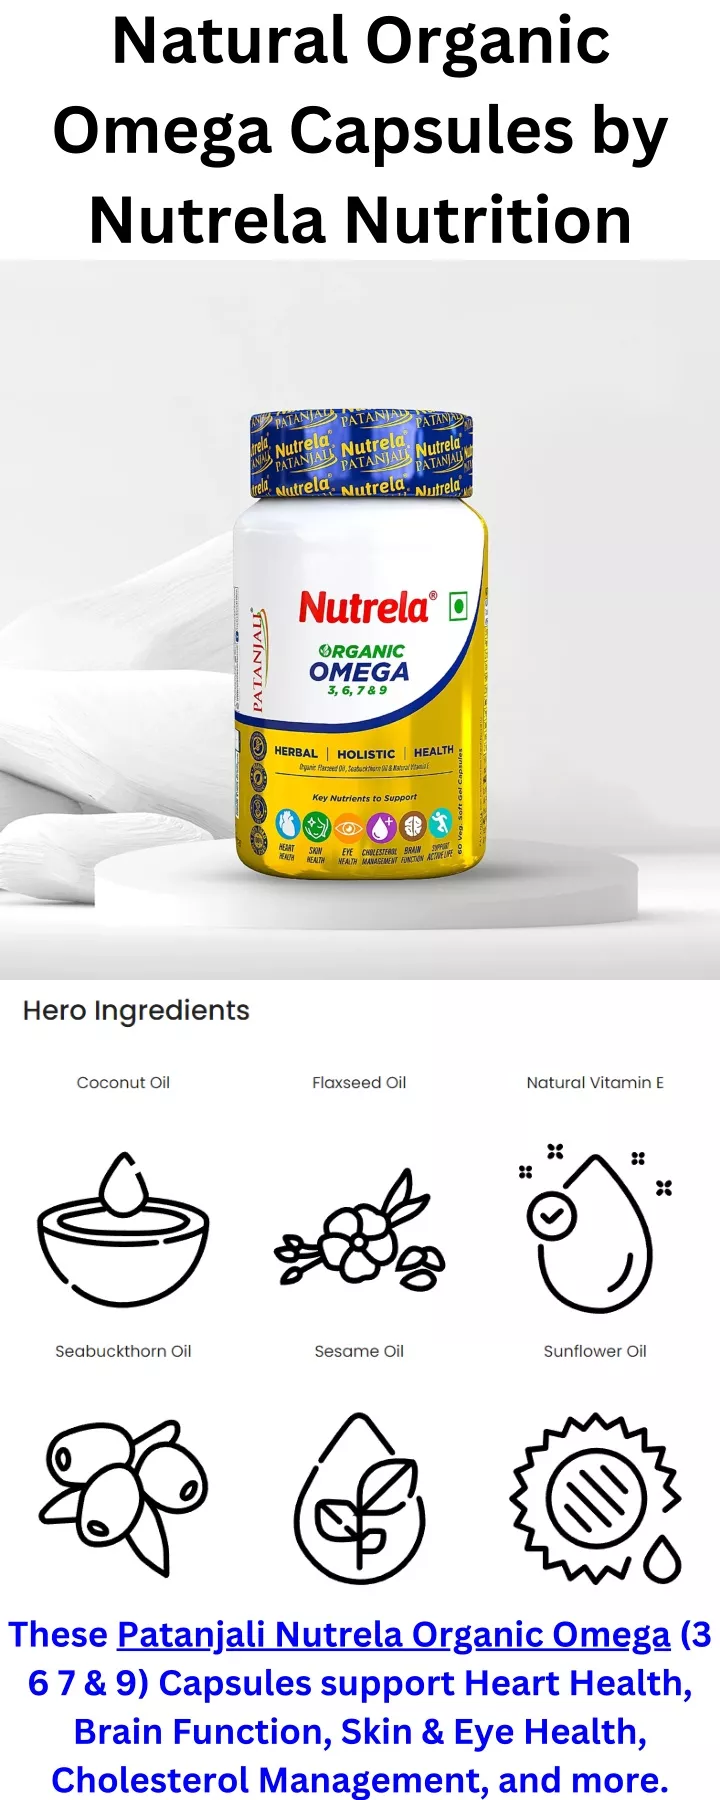 natural organic omega capsules by nutrela